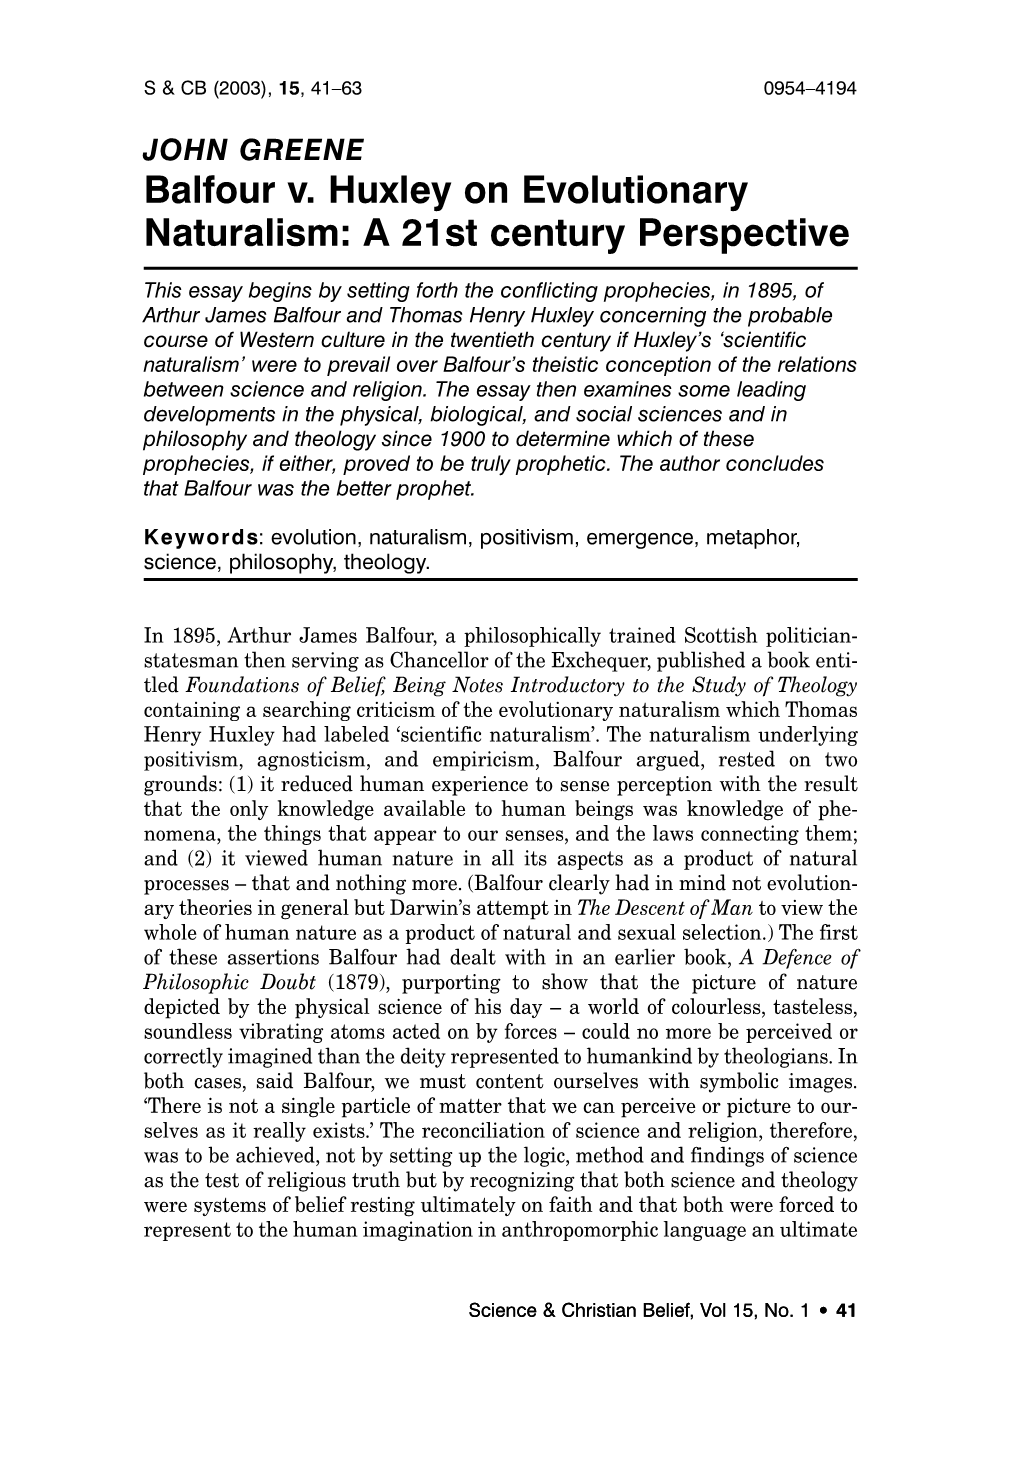 Balfour V. Huxley on Evolutionary Naturalism: a 21St Century Perspective